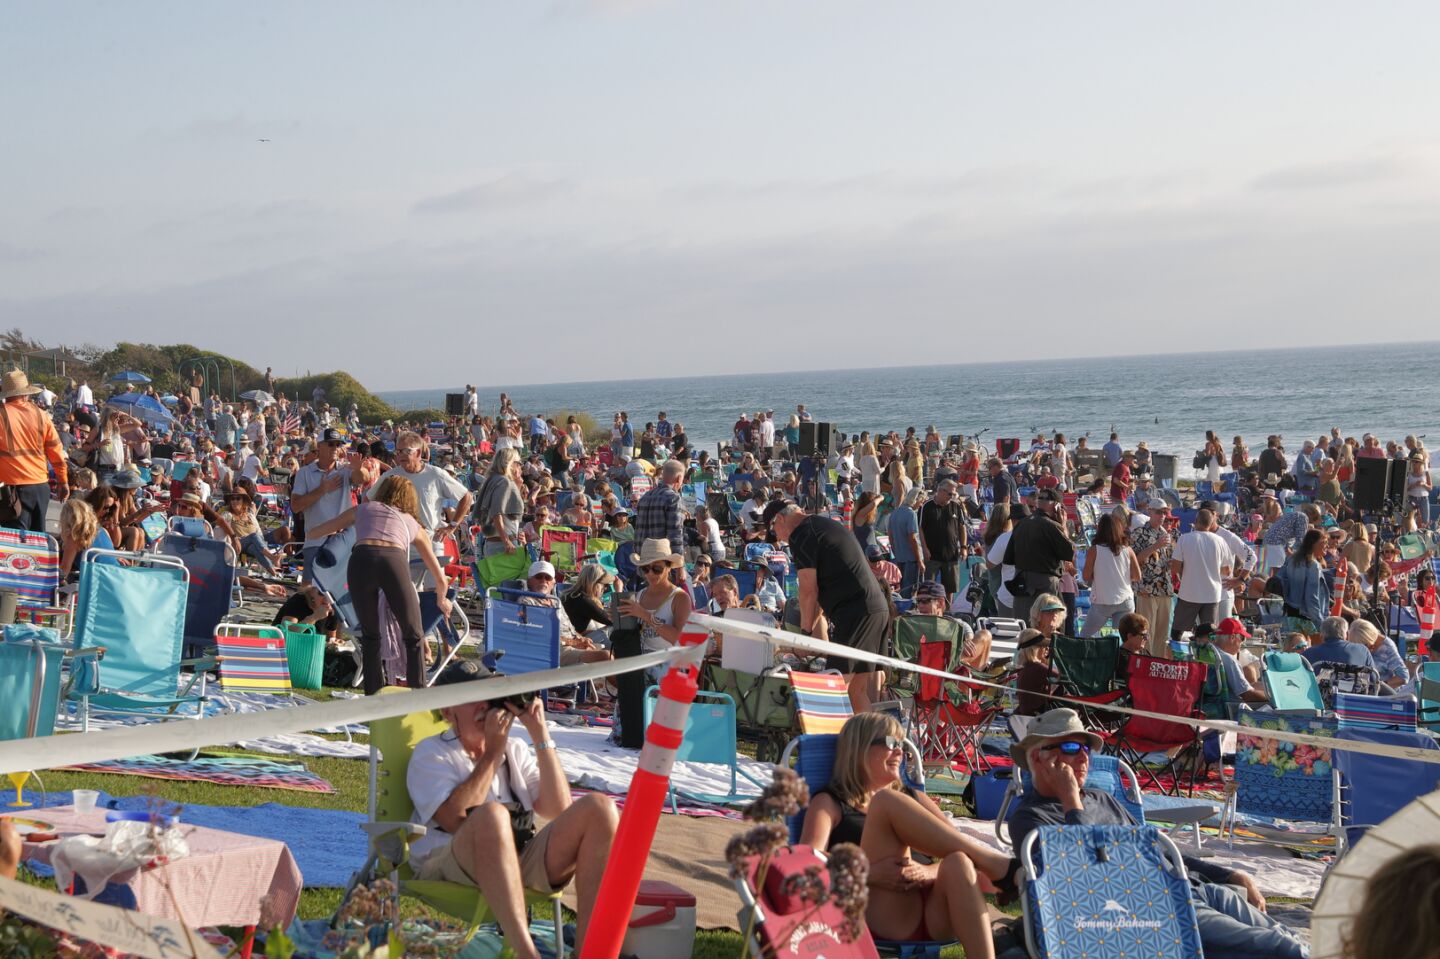 The final Summer Twilight Concert of 2022 at Powerhouse Park in Del Mar